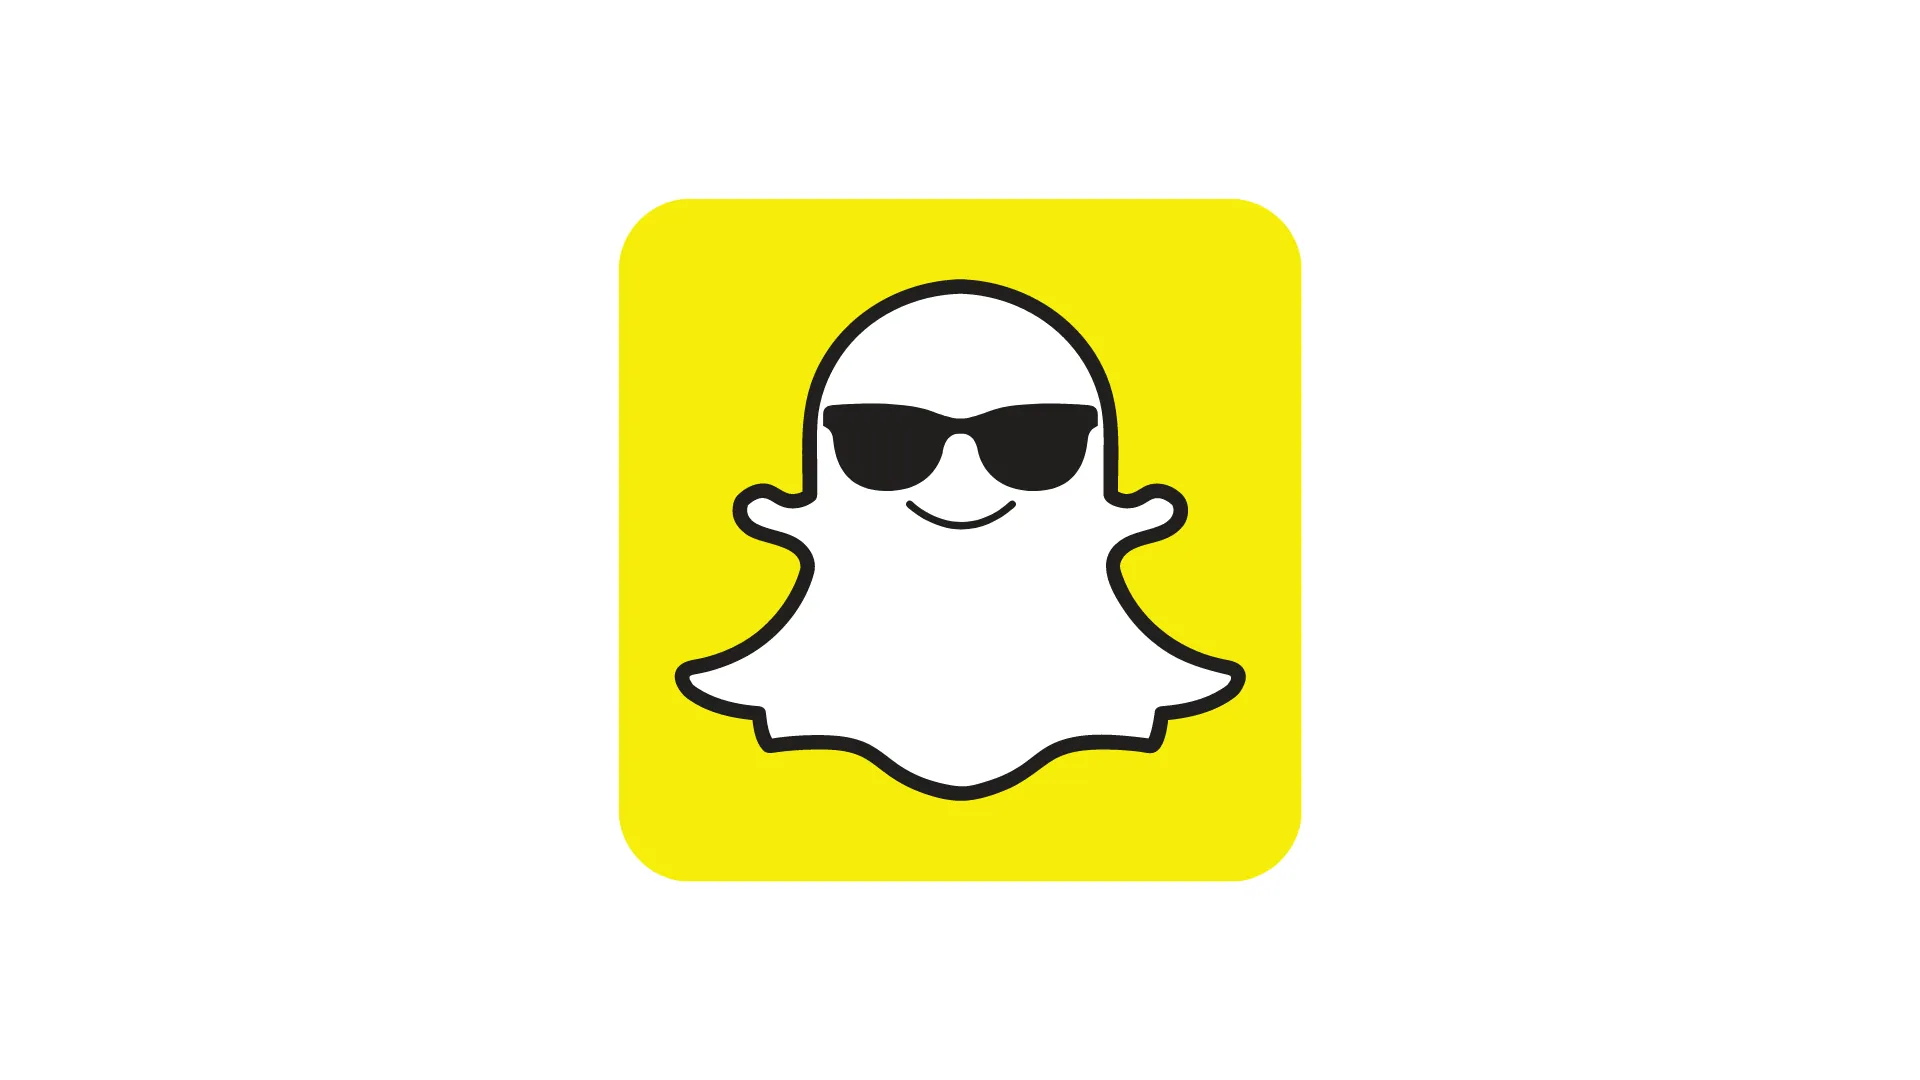 What Does The Sunglasses Emoji Mean On Snapchat?